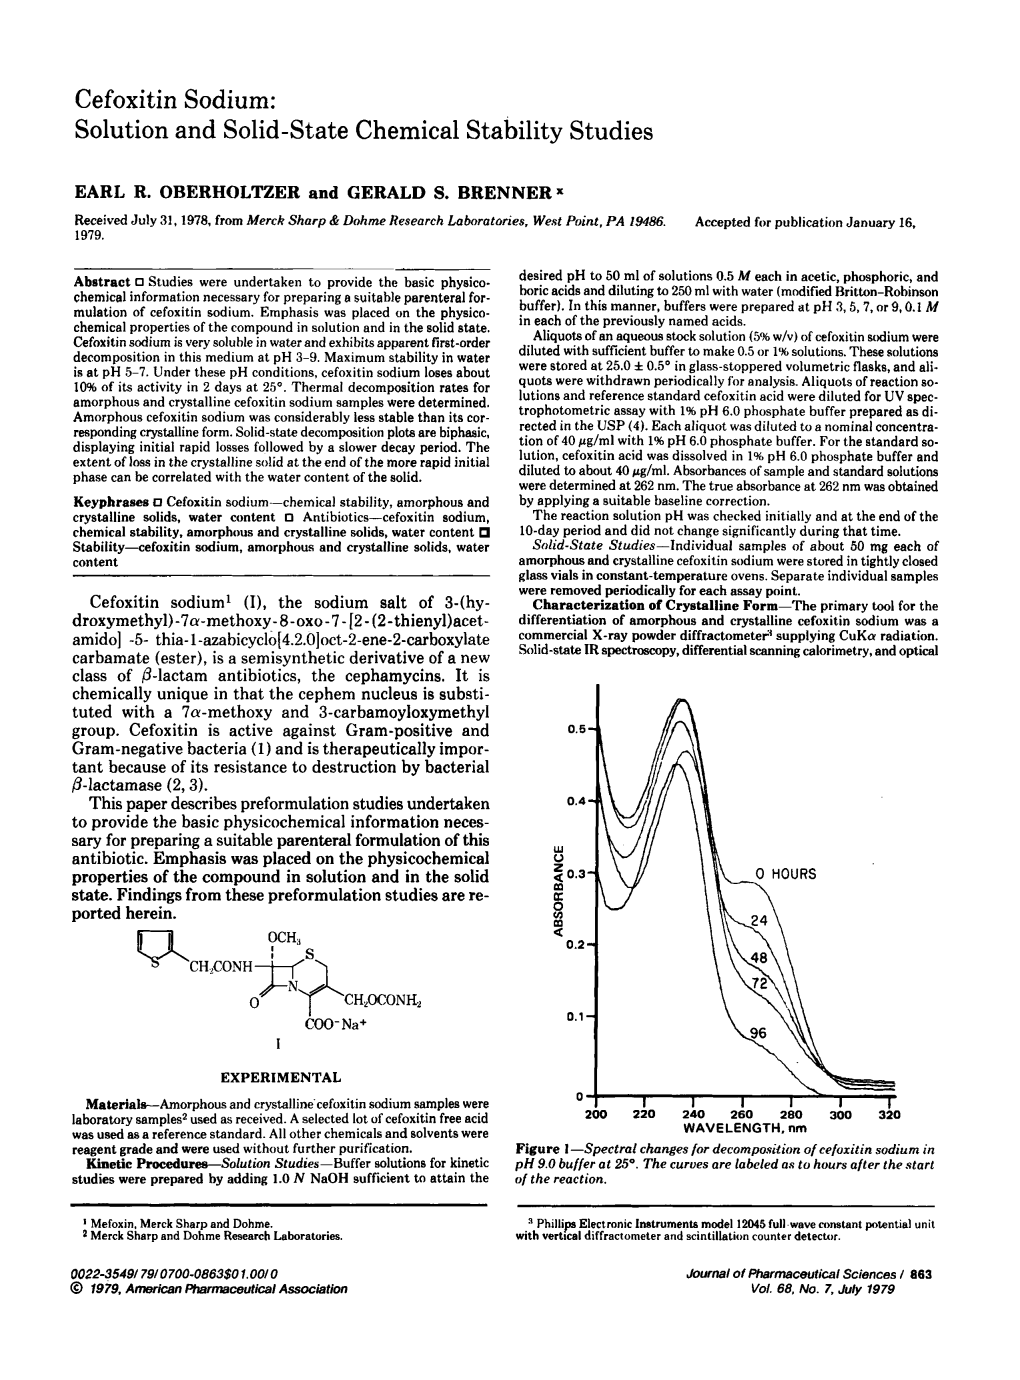 Cefoxitin Sodium: Solution and Solid-State Chemical Stability Studies